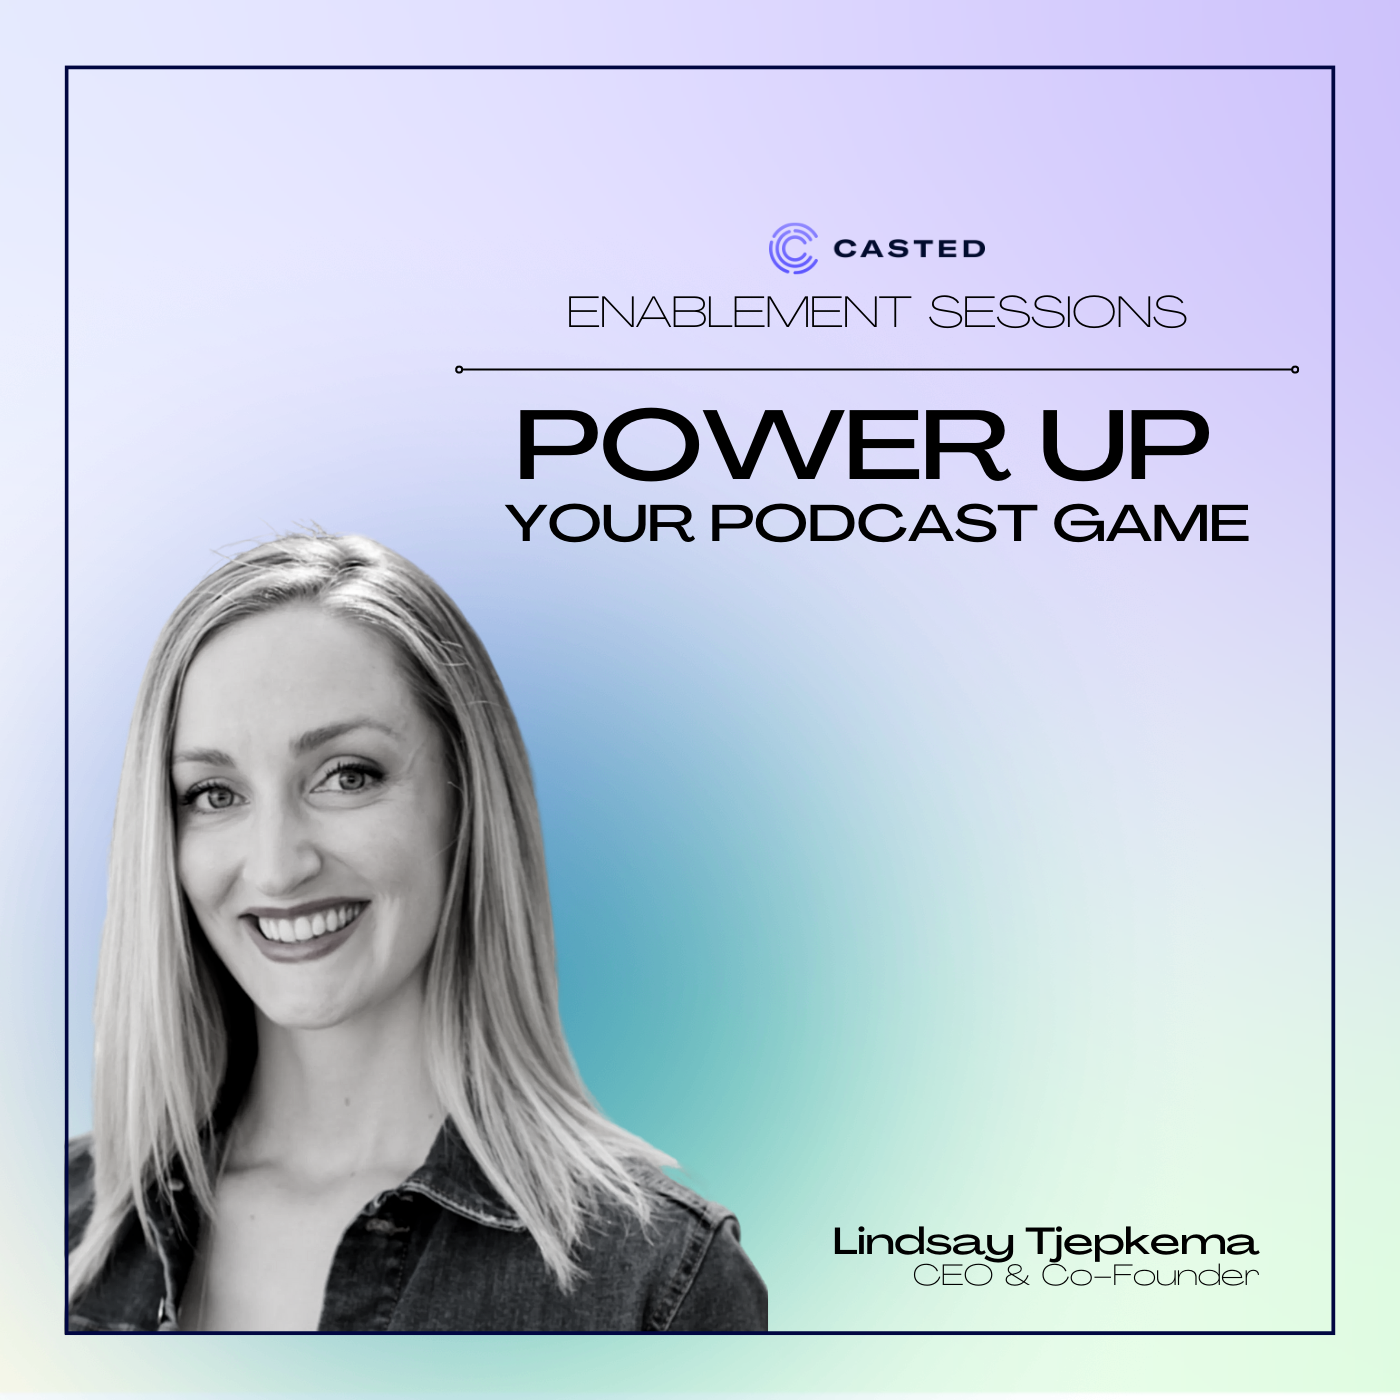 Power Up Your Podcast Game with Lindsay Tjepkema & Katie Nehrenz | Enablement Session #2